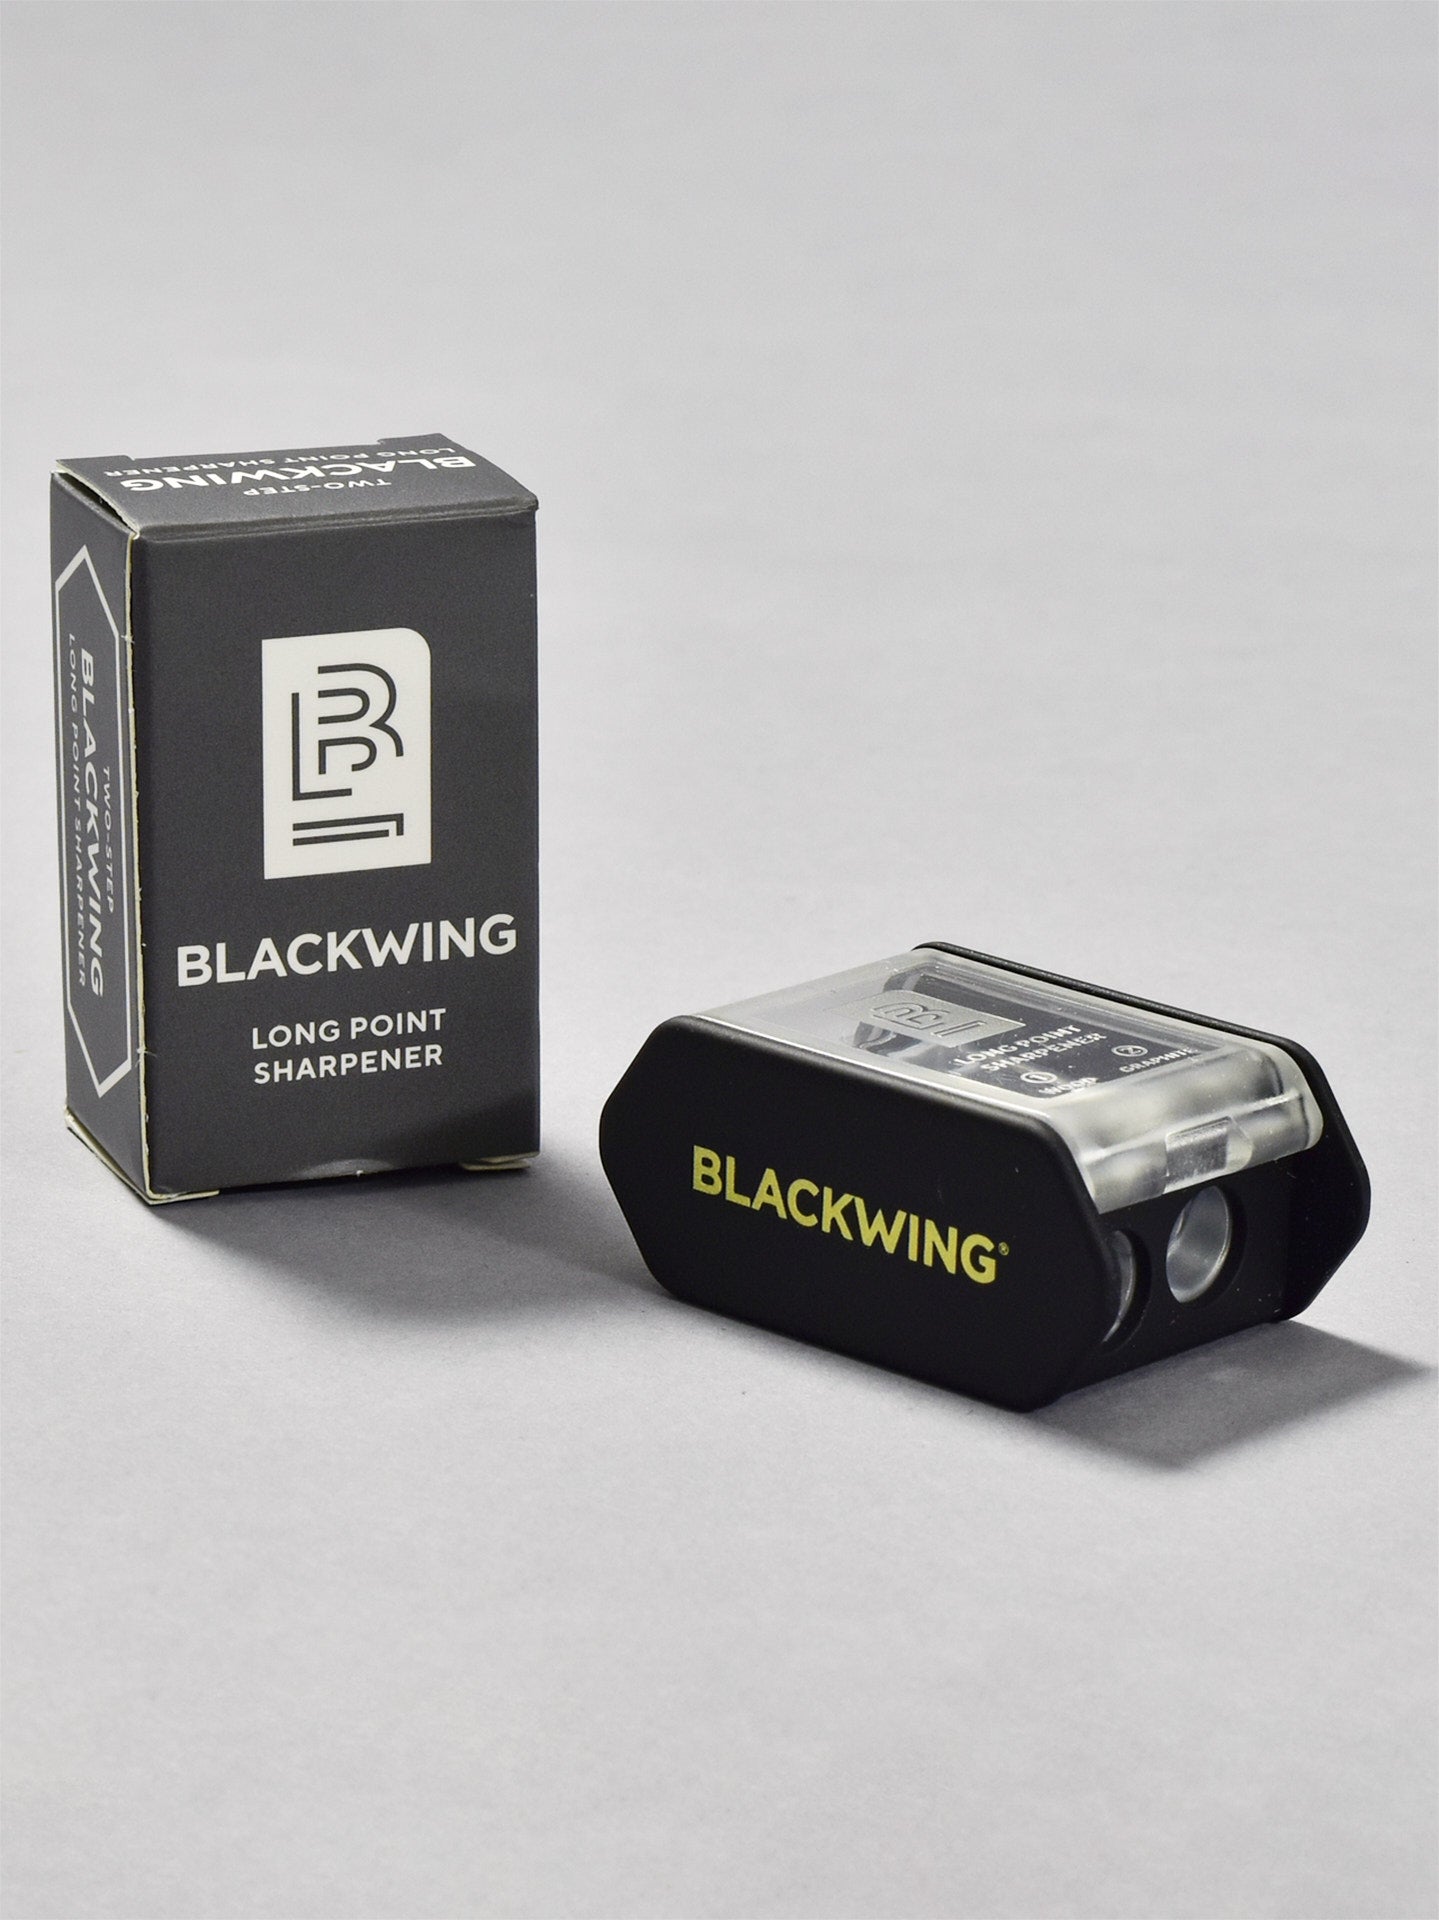 A Palomino Blackwing Long Point Pencil Sharpener box with a Blackwing logo on it.